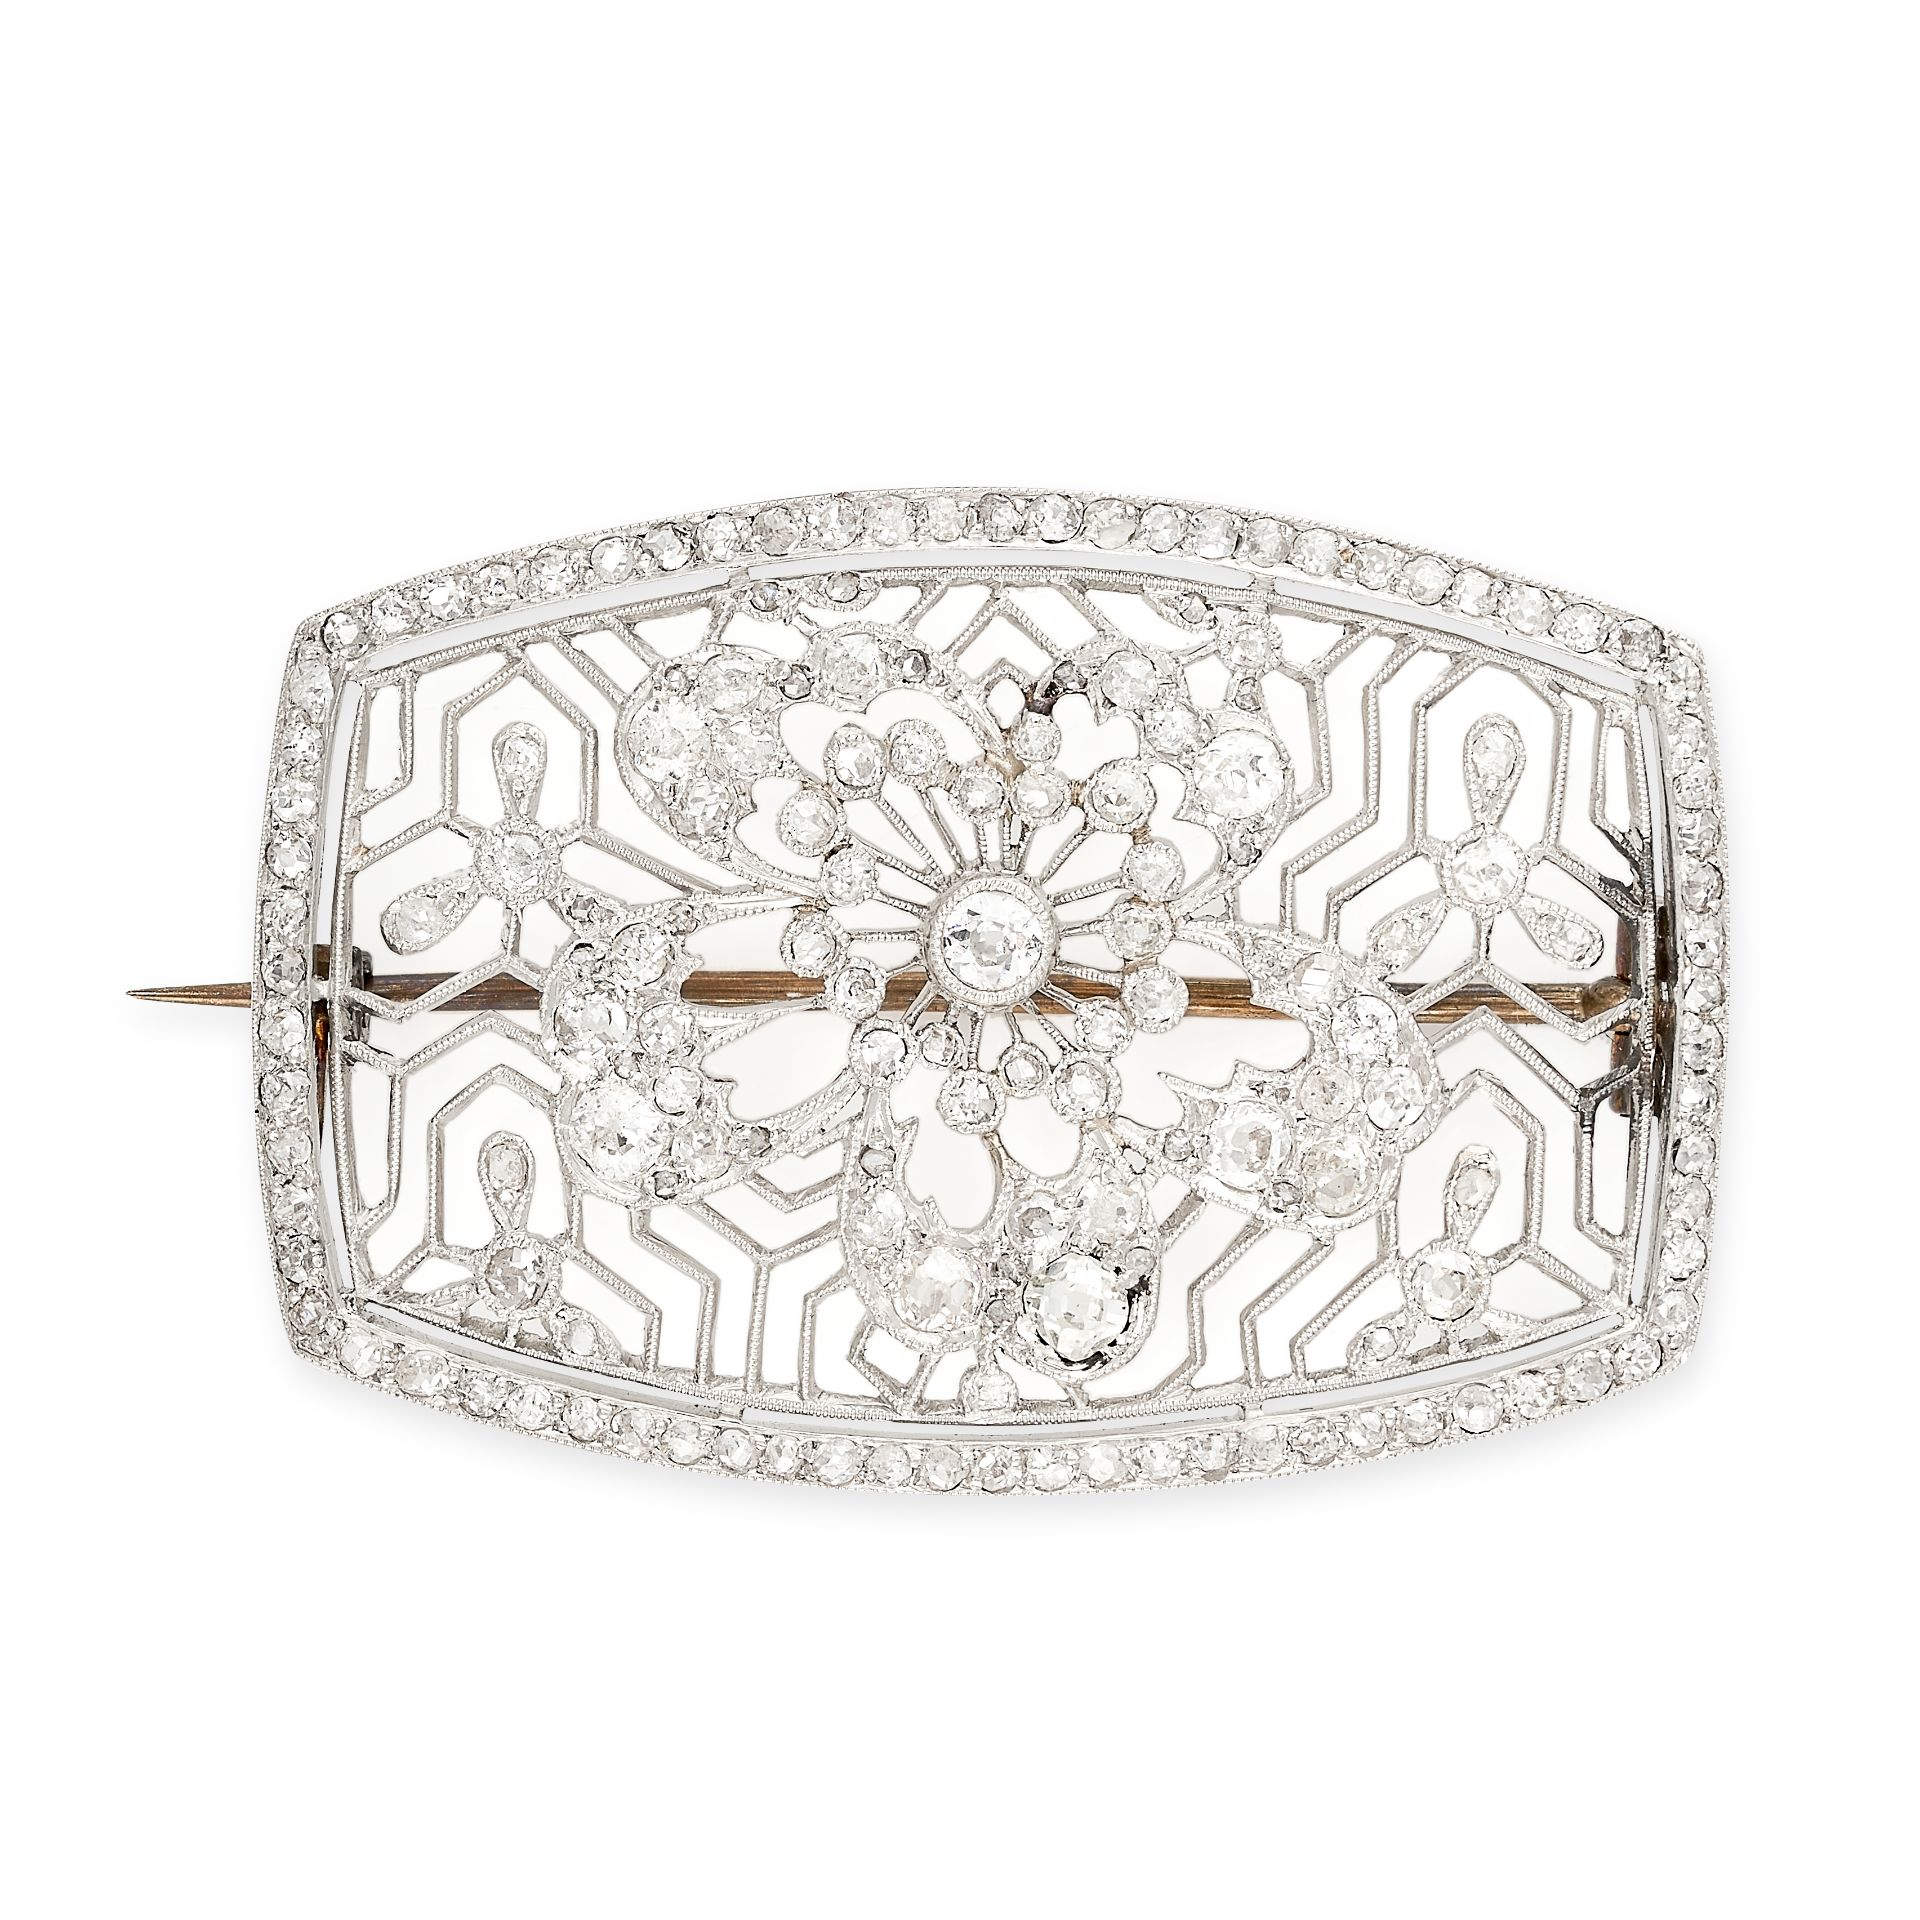 NO RESERVE - AN ANTIQUE FRENCH DIAMOND JAPONISME BROOCH, CIRCA 1910  Made in platinum, openwork